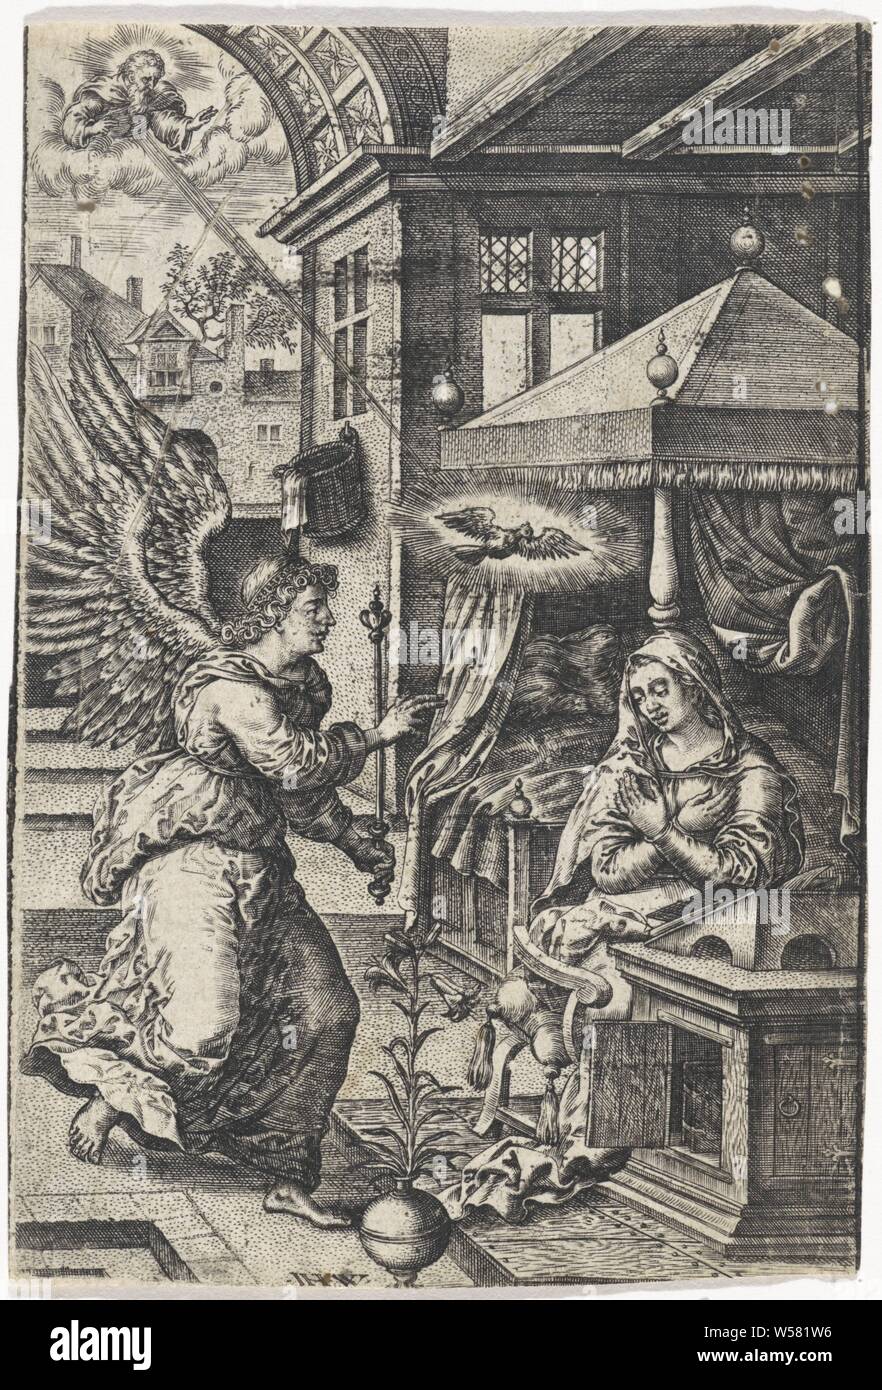 Annunciation, Johannes Wierix (mentioned on object), Antwerp, 1573, paper, engraving, h 112 mm × w 76 mm Stock Photo